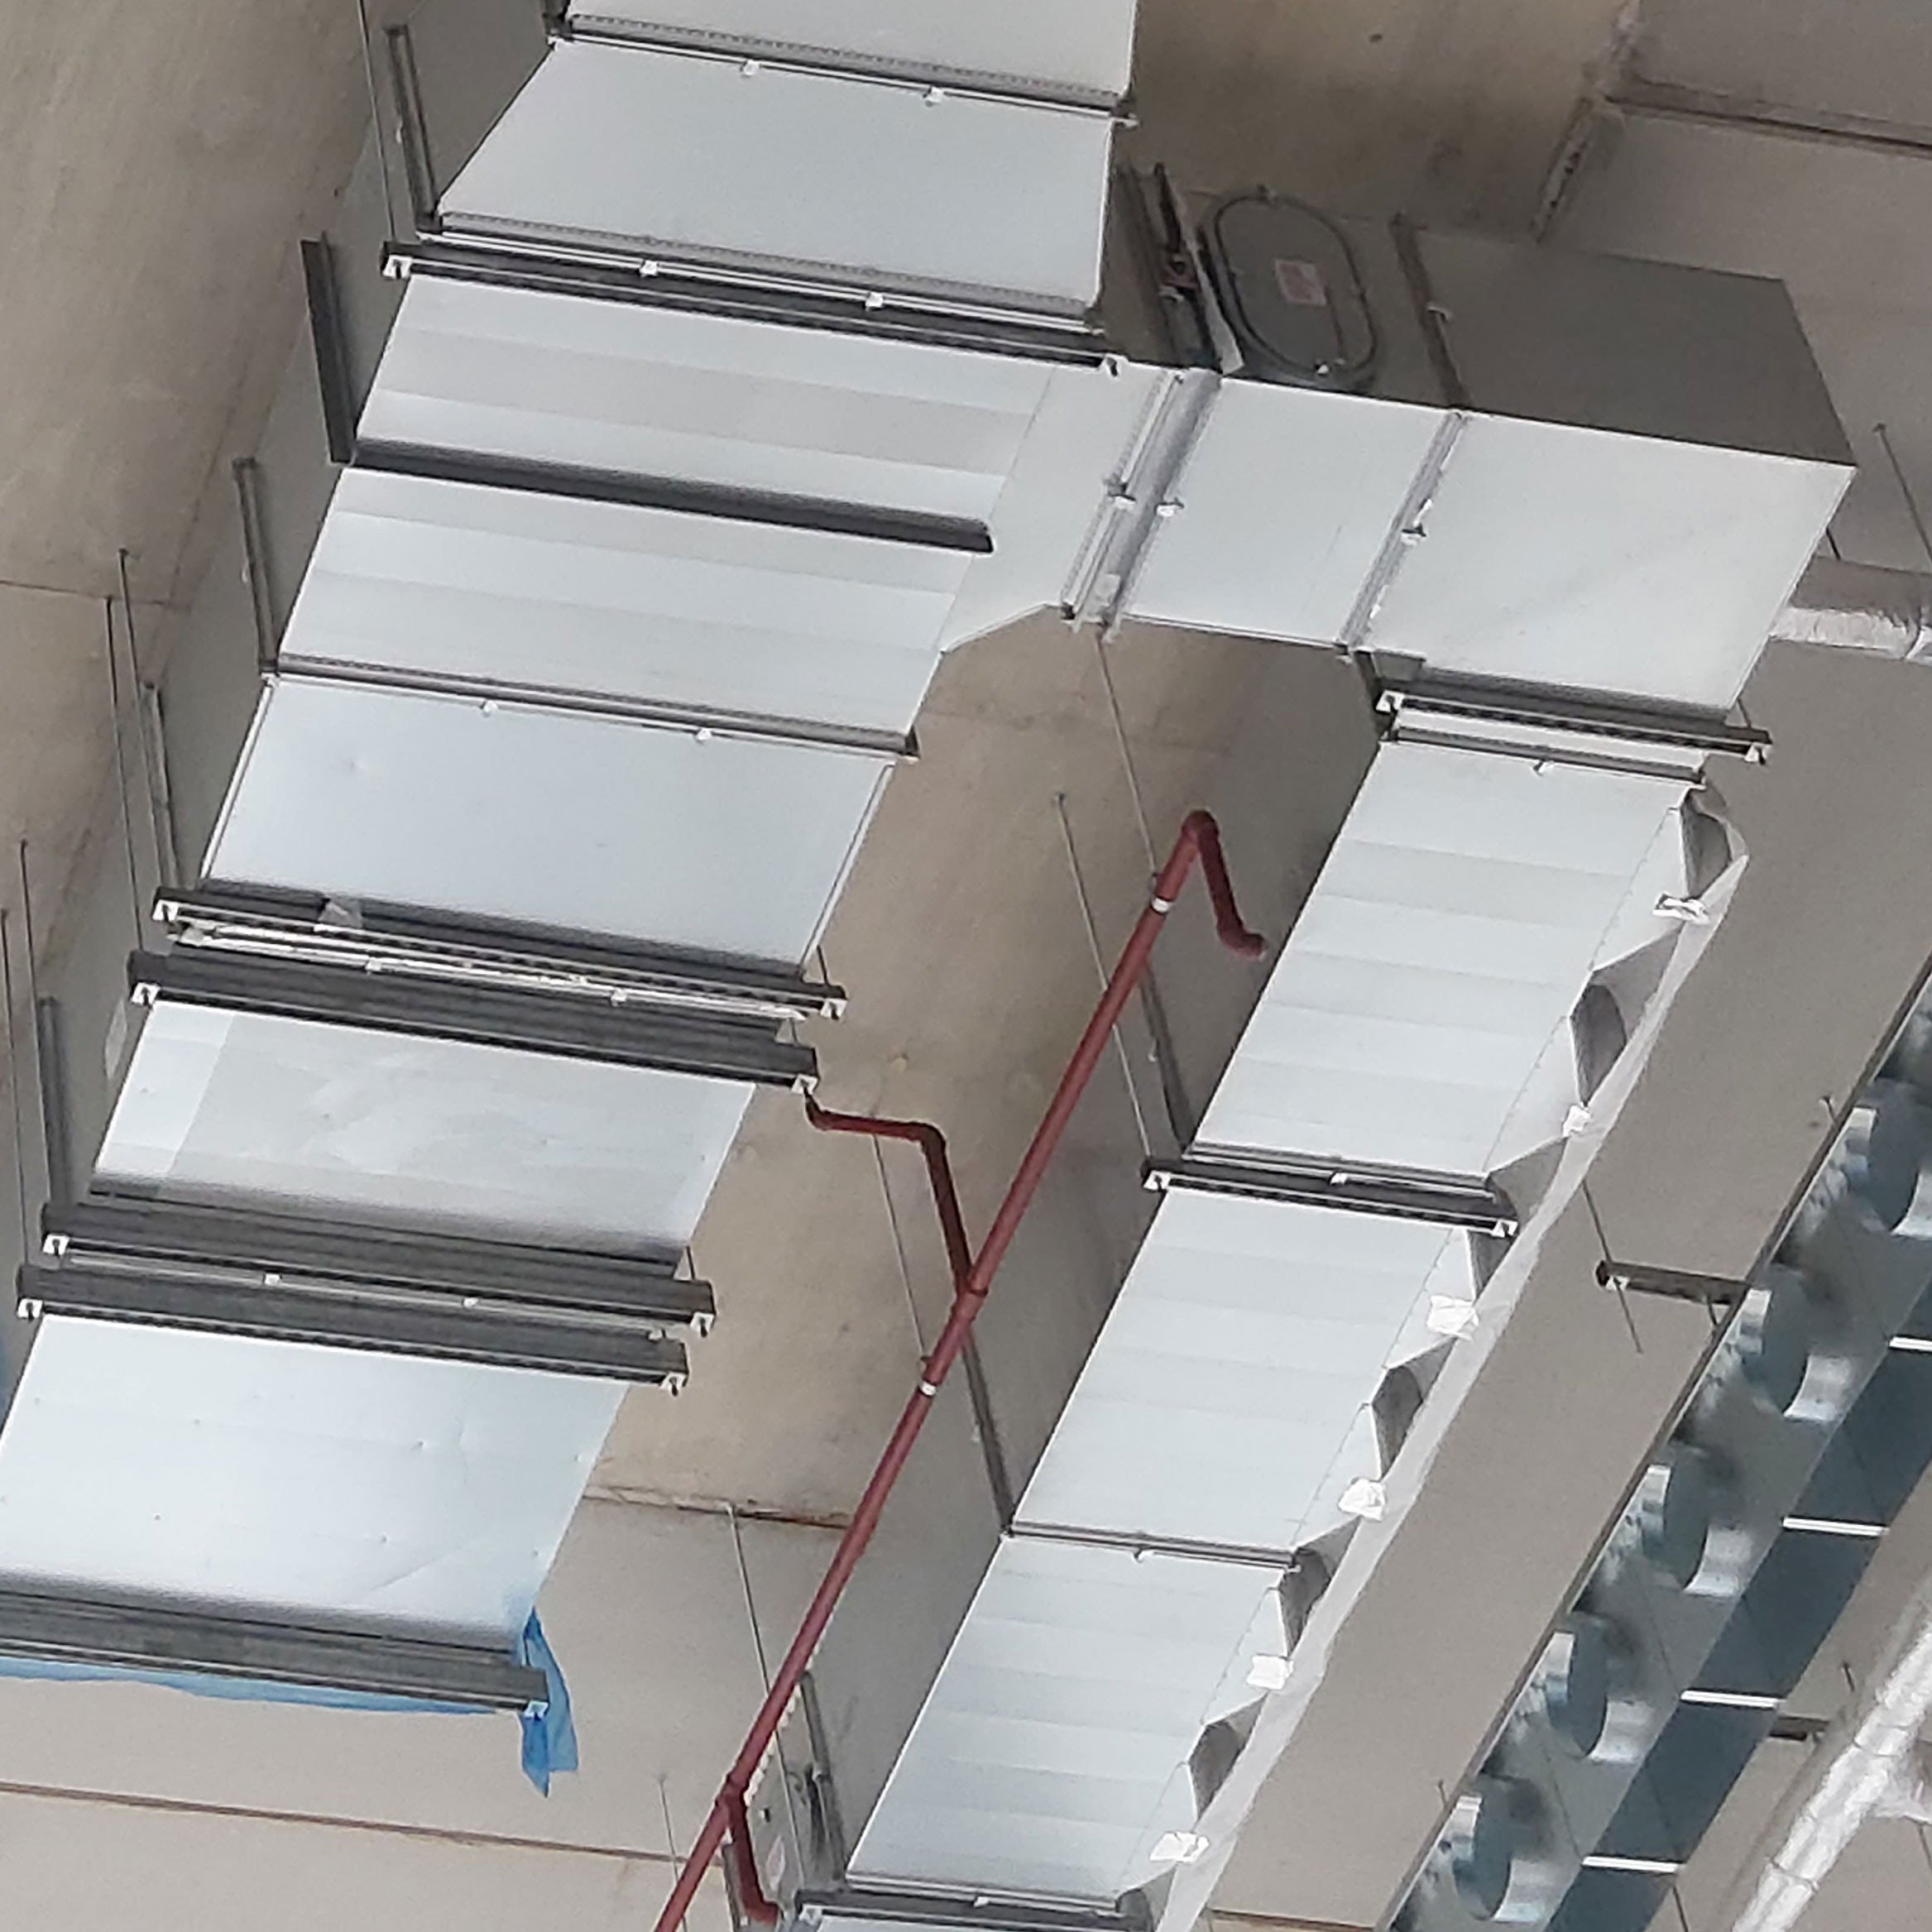 fabricated galvanised ventilation ductwork pipes